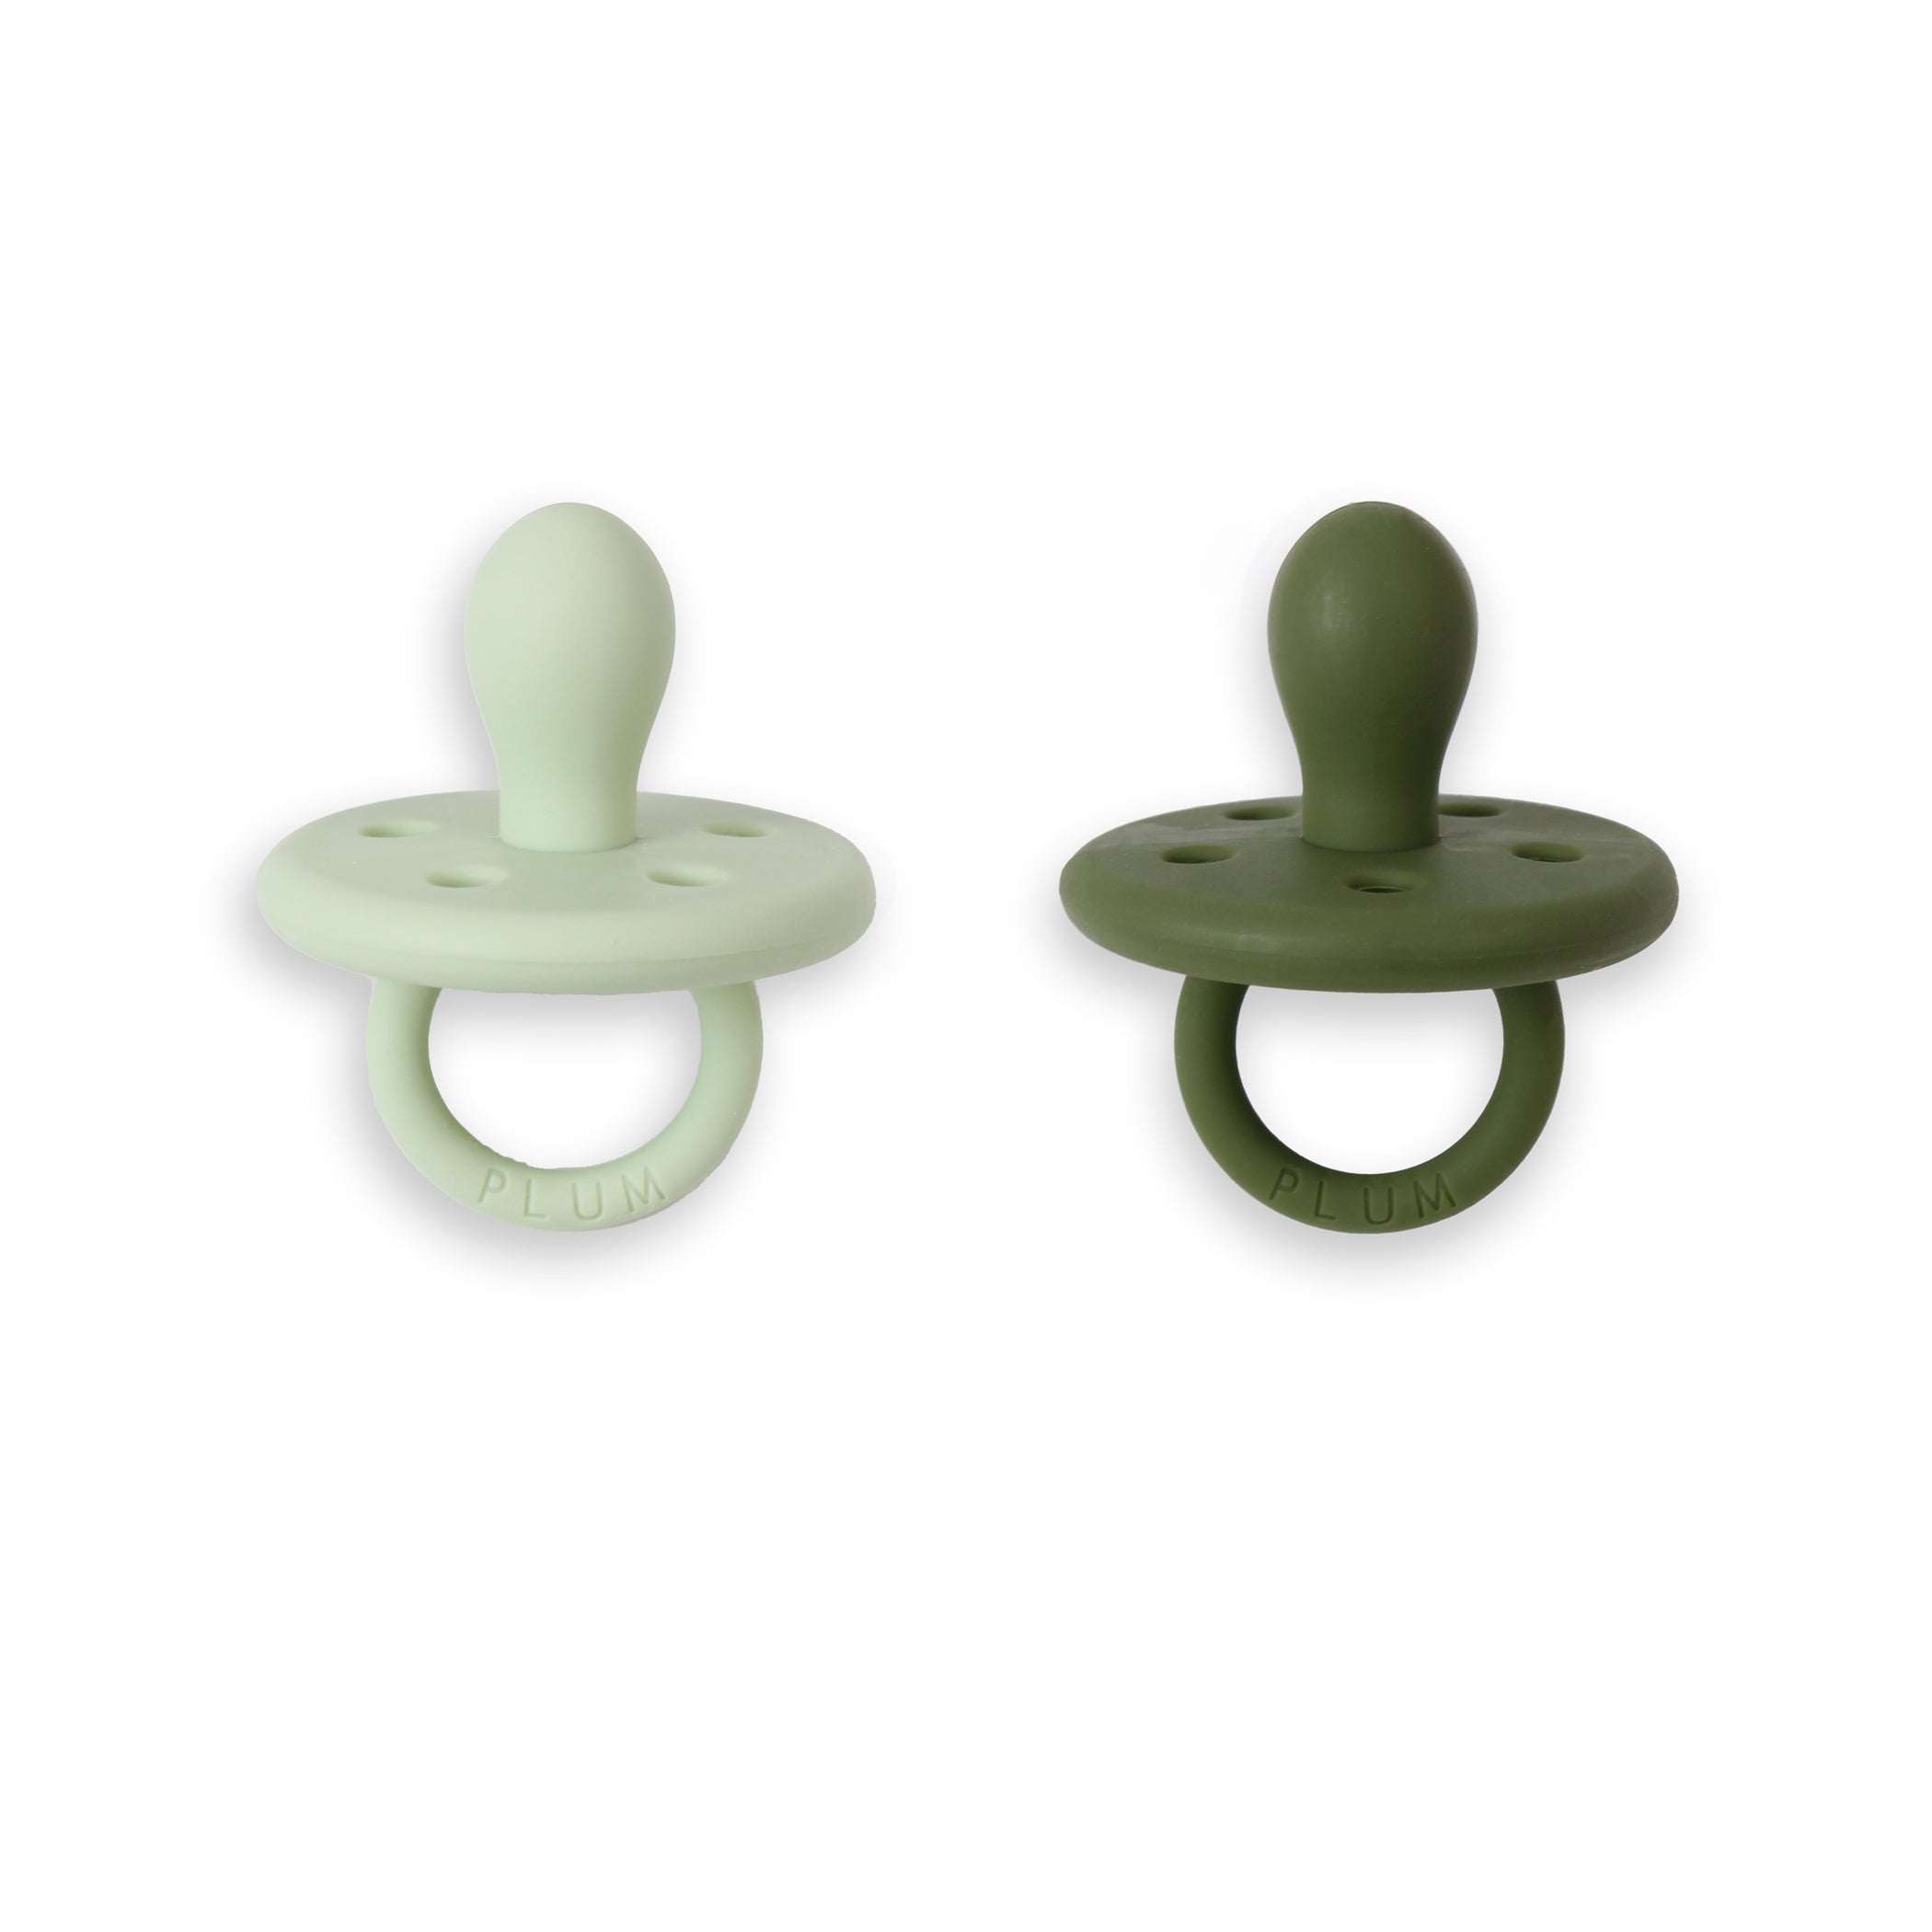 2PK Silicone Soothers - Olive & Pesto (0-6M)